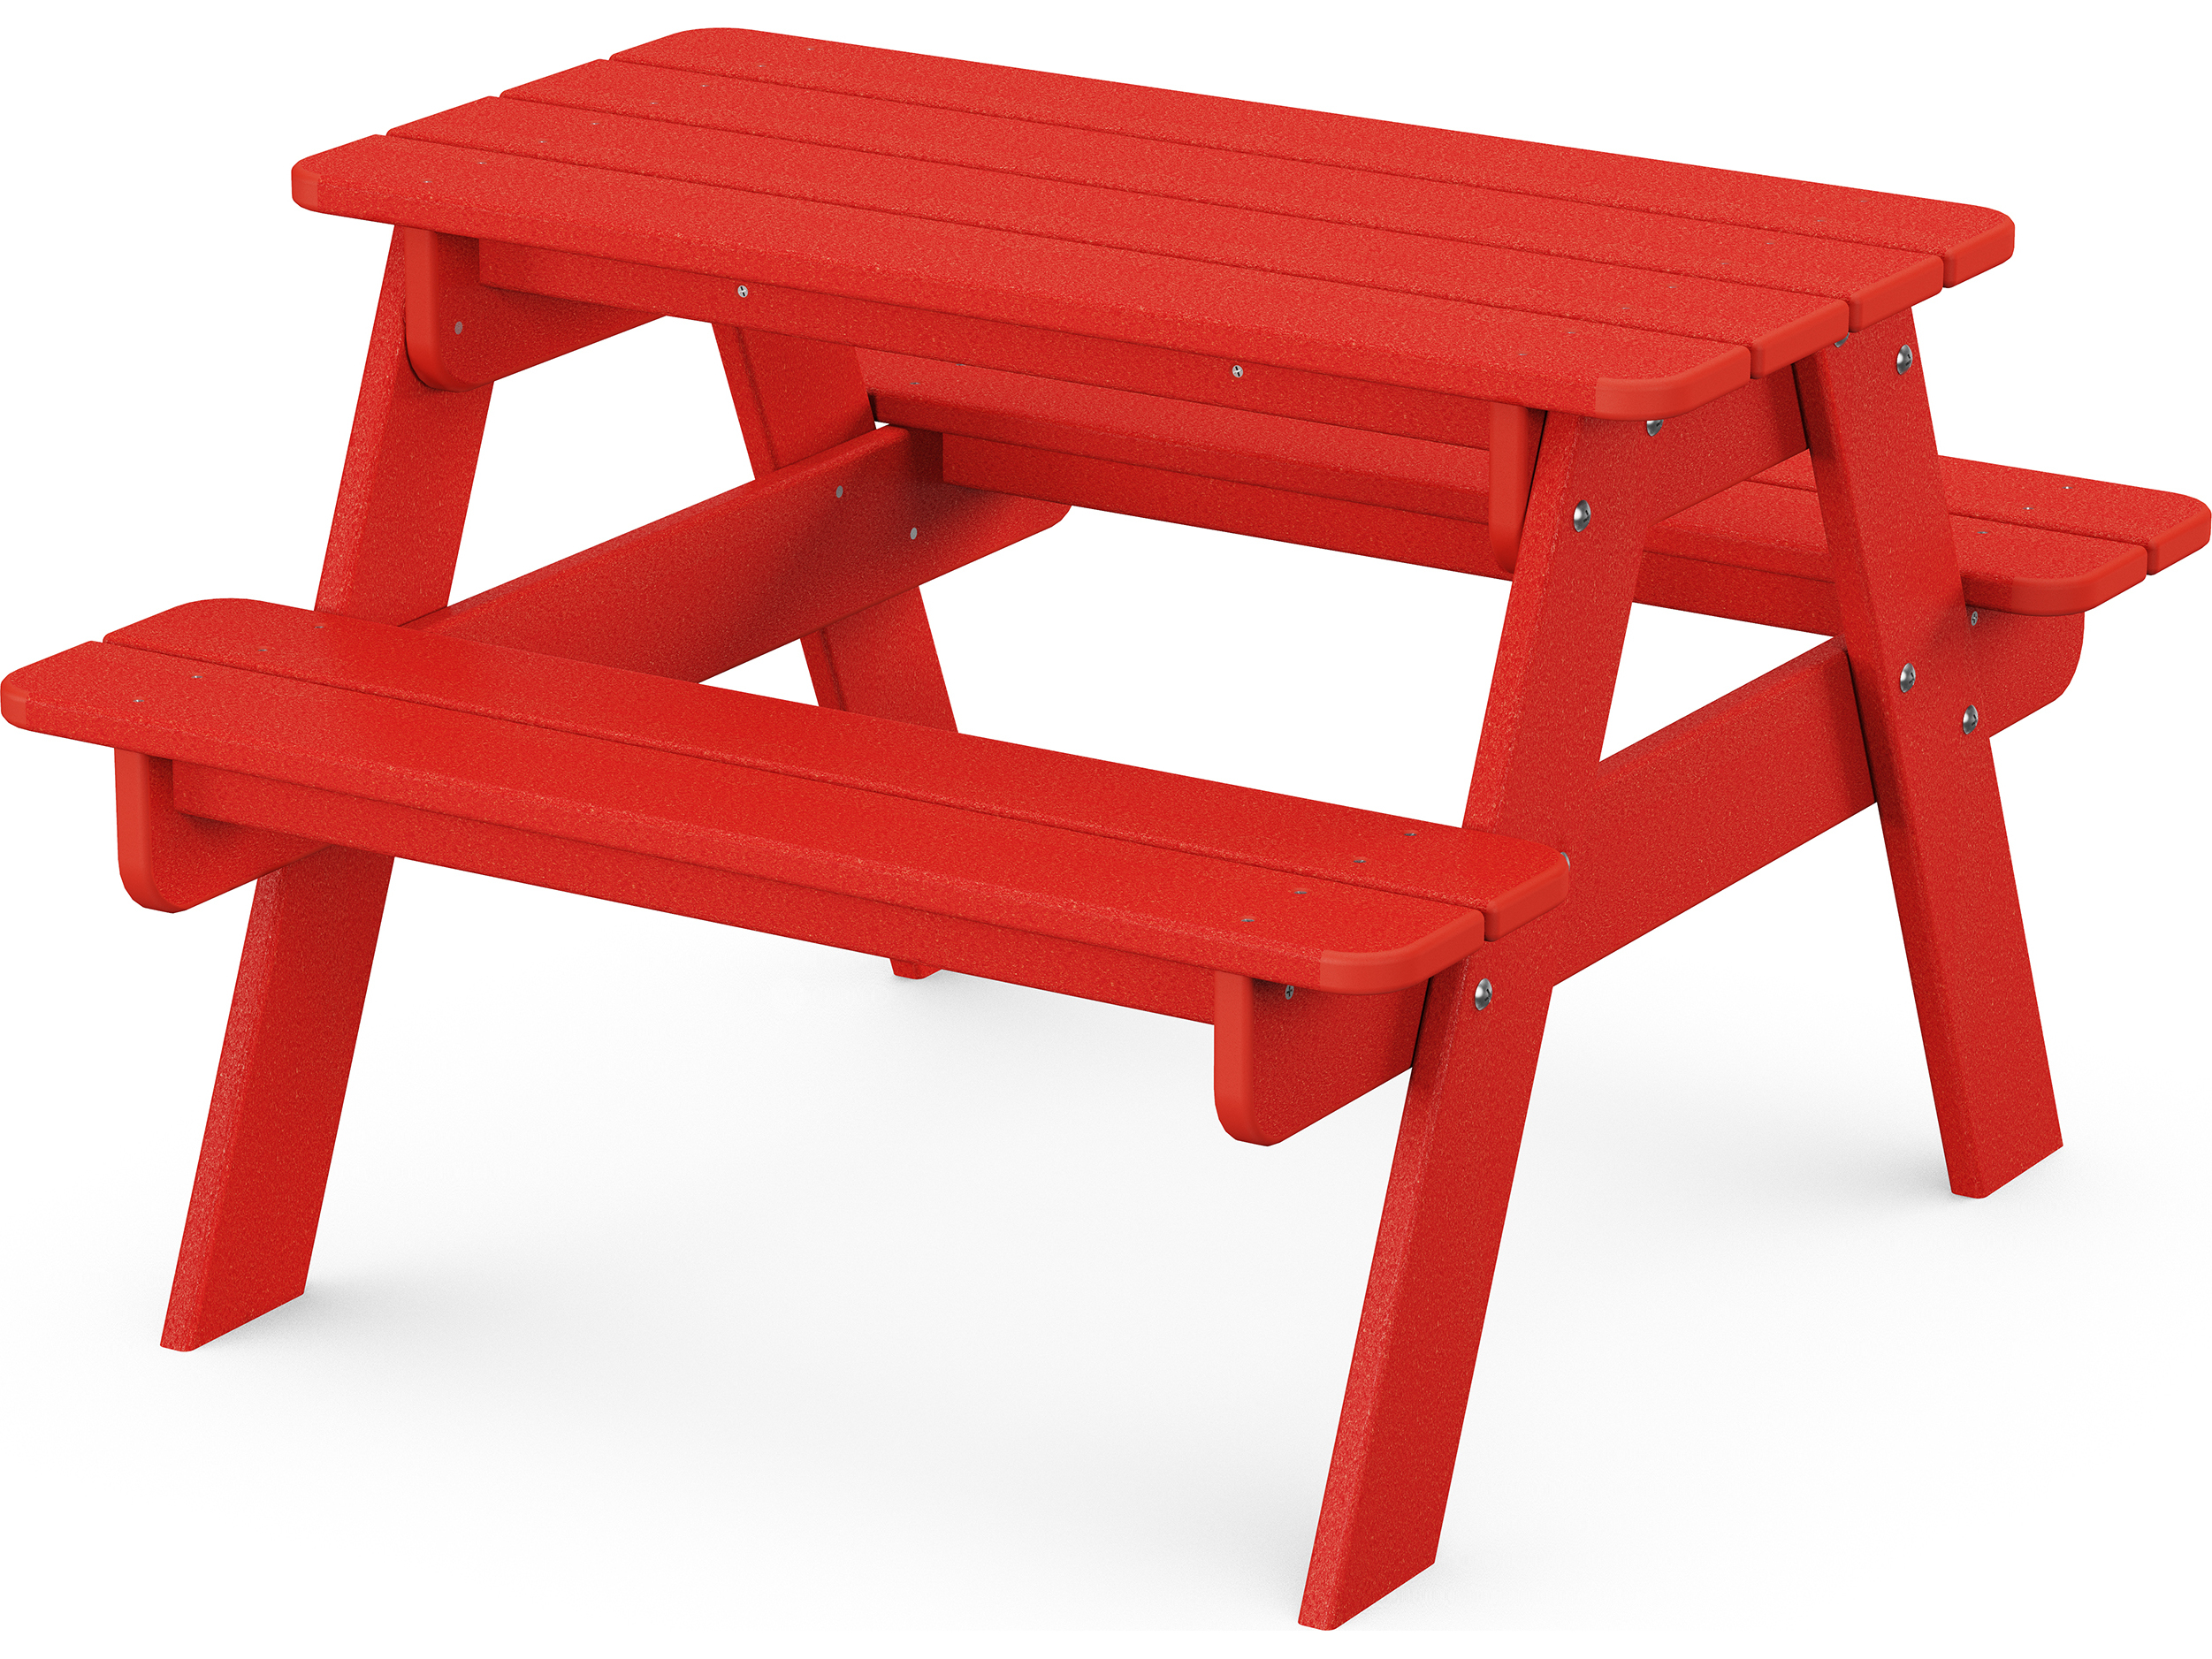 Kids' Outdoor Picnic Tables